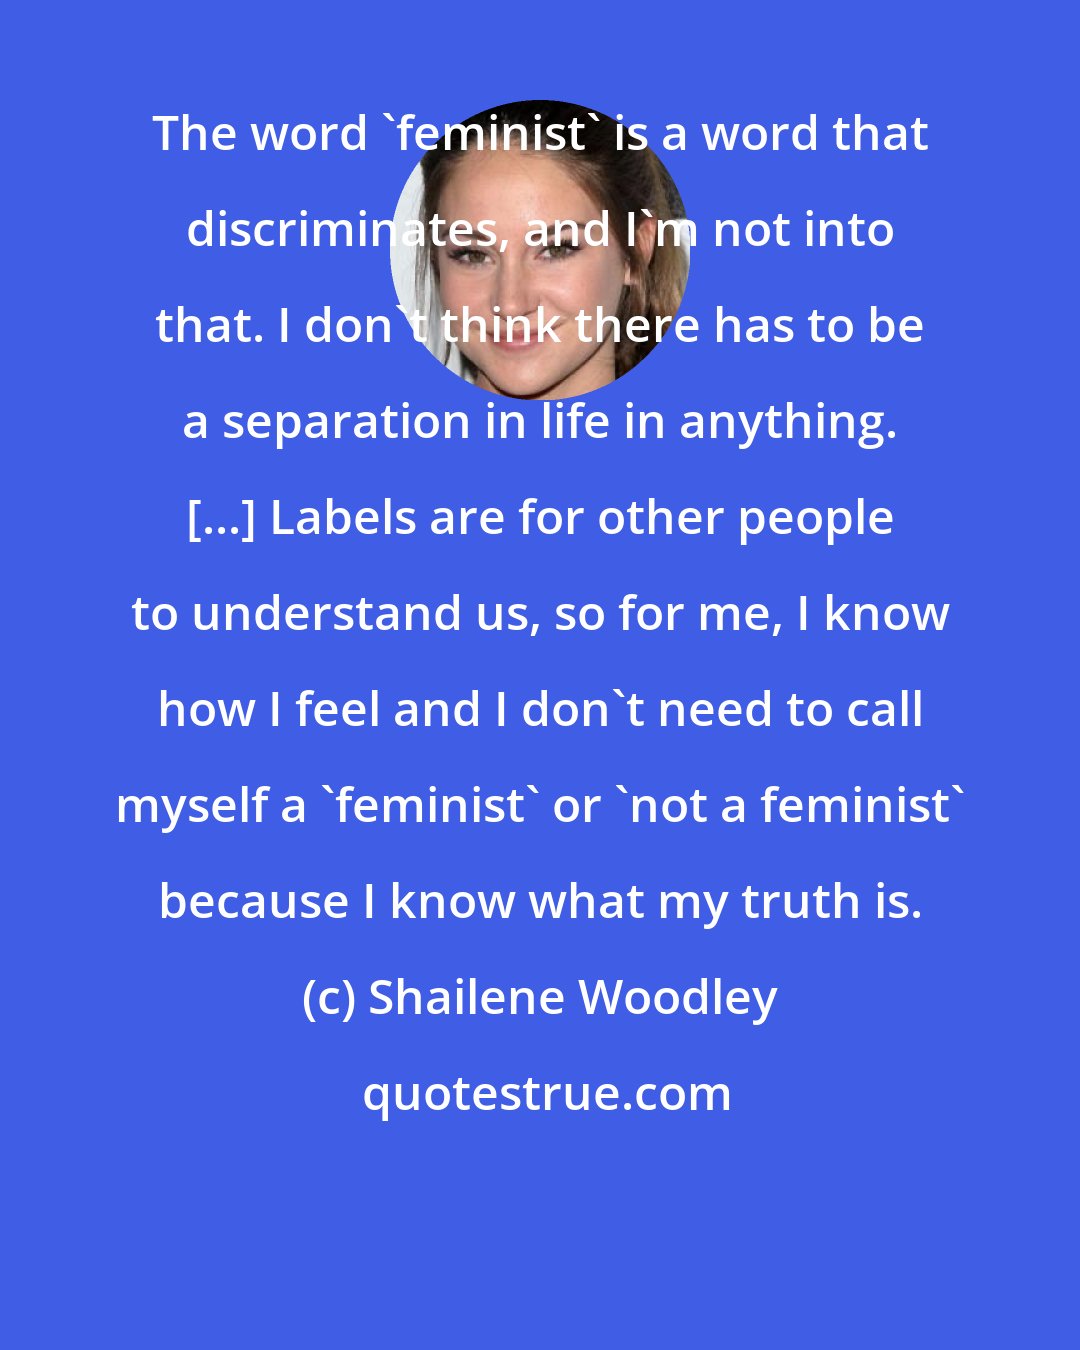 Shailene Woodley: The word 'feminist' is a word that discriminates, and I'm not into that. I don't think there has to be a separation in life in anything. [...] Labels are for other people to understand us, so for me, I know how I feel and I don't need to call myself a 'feminist' or 'not a feminist' because I know what my truth is.